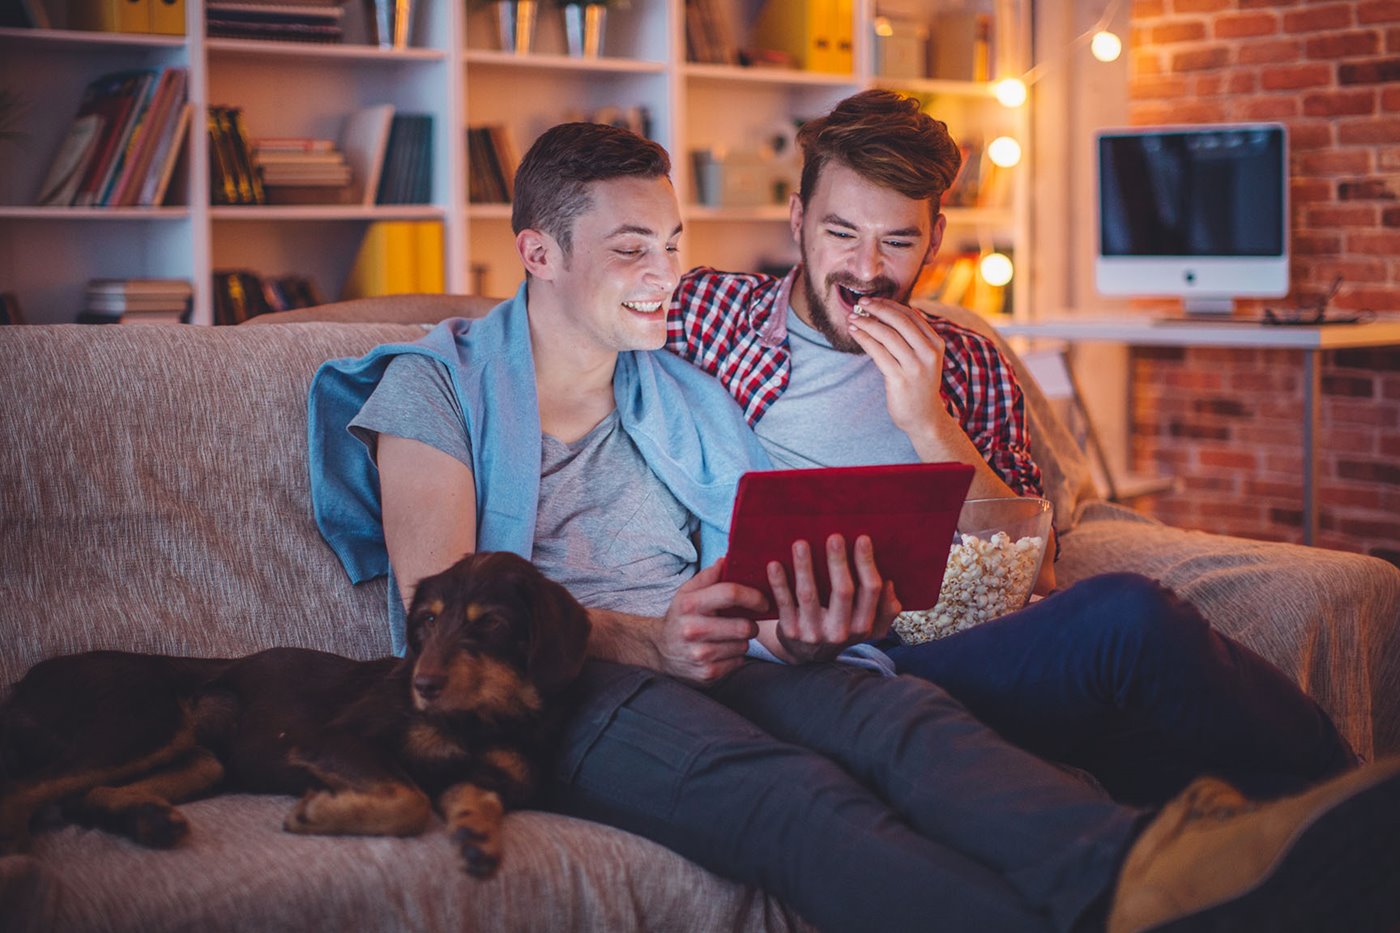 Two men sit on the couch next to their dog while smiling at an iPad and eating popcorn